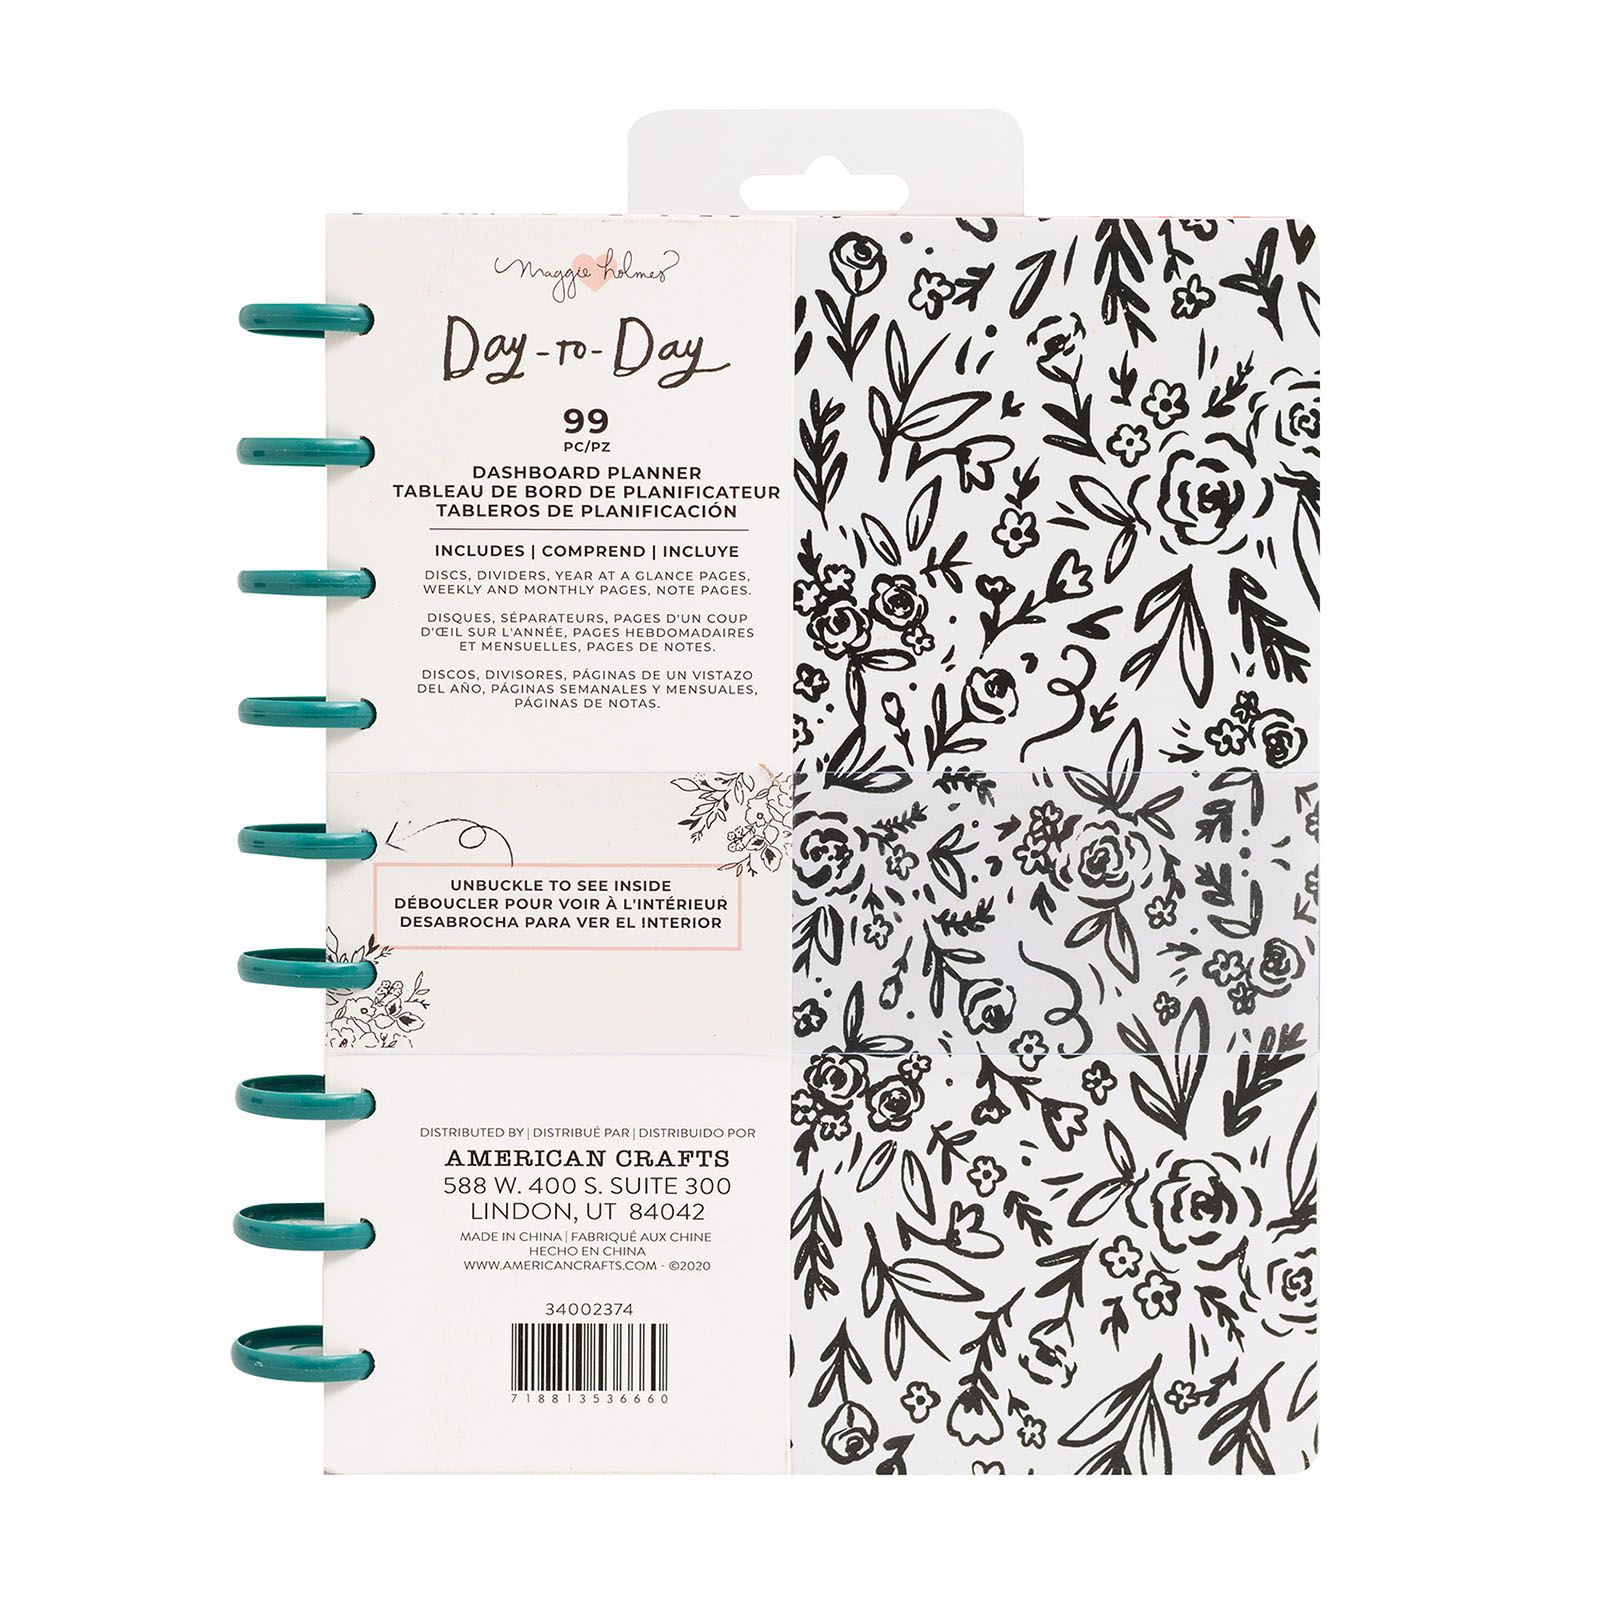 Crate Paper • Day-to-Day dashboard planner Black and White floral